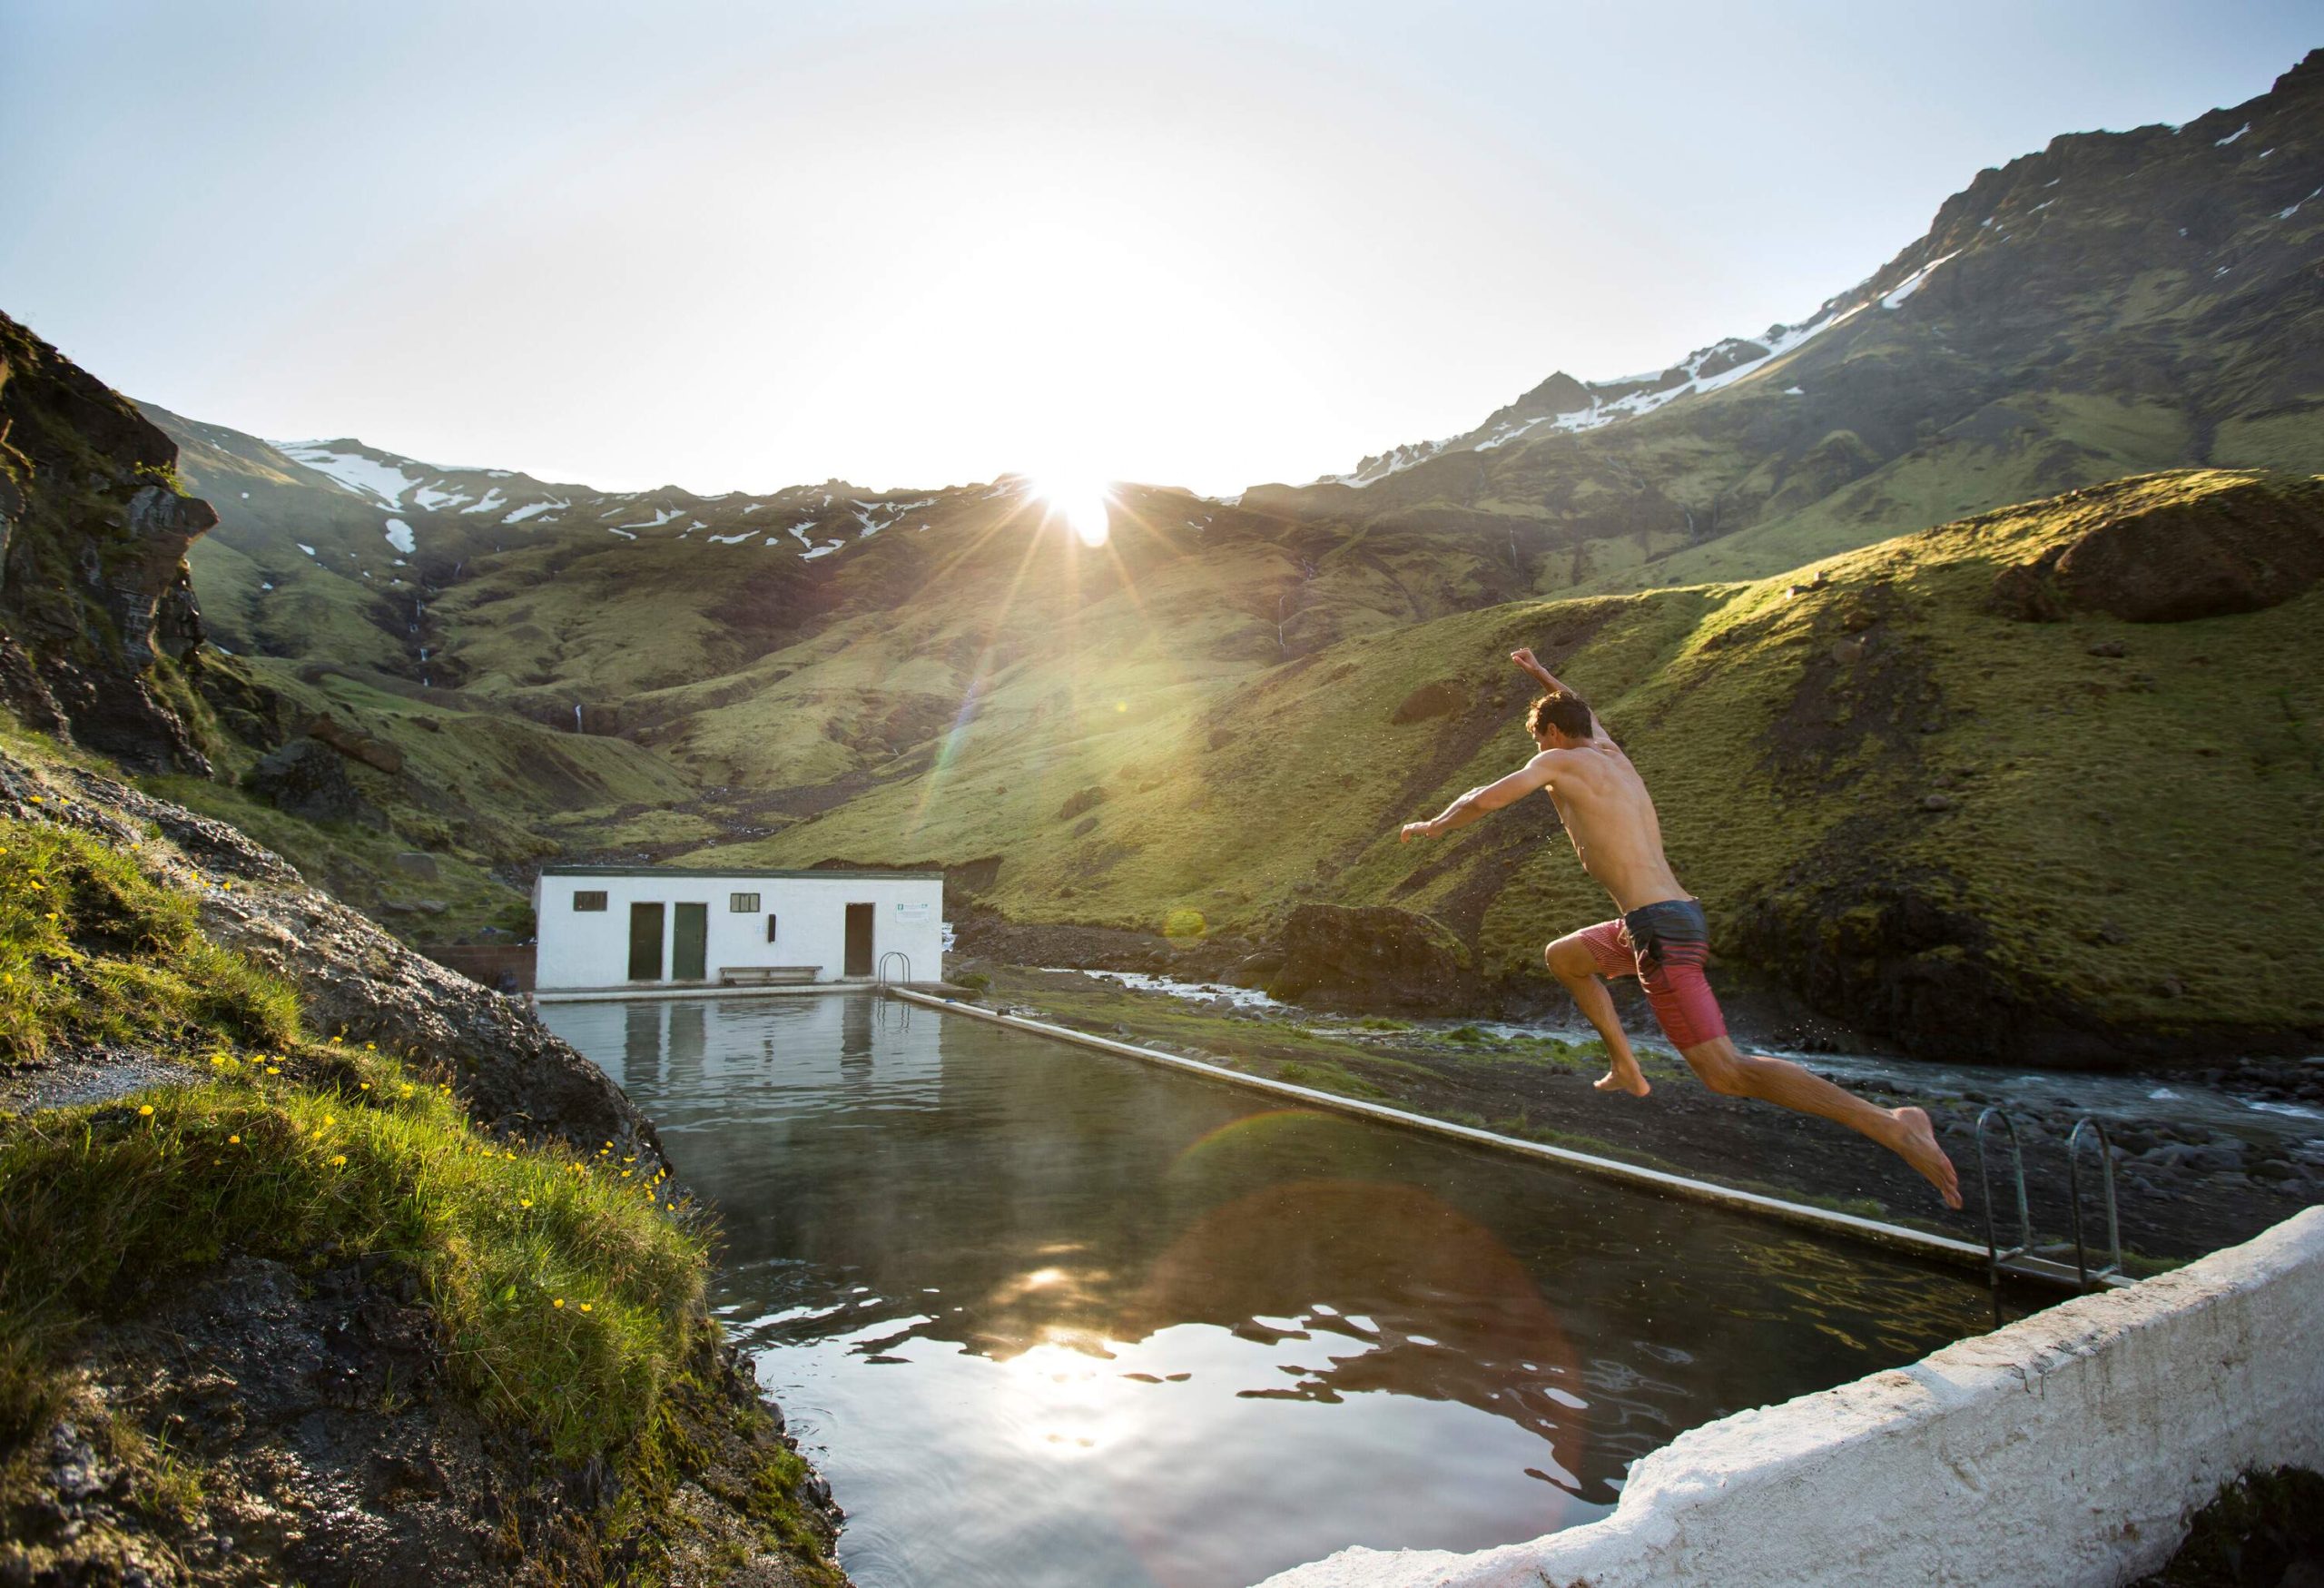 A man jumps into a geothermal hot spring, surrounded by rugged hills with sparse vegetation and a white structure visible on the other side of the pool.